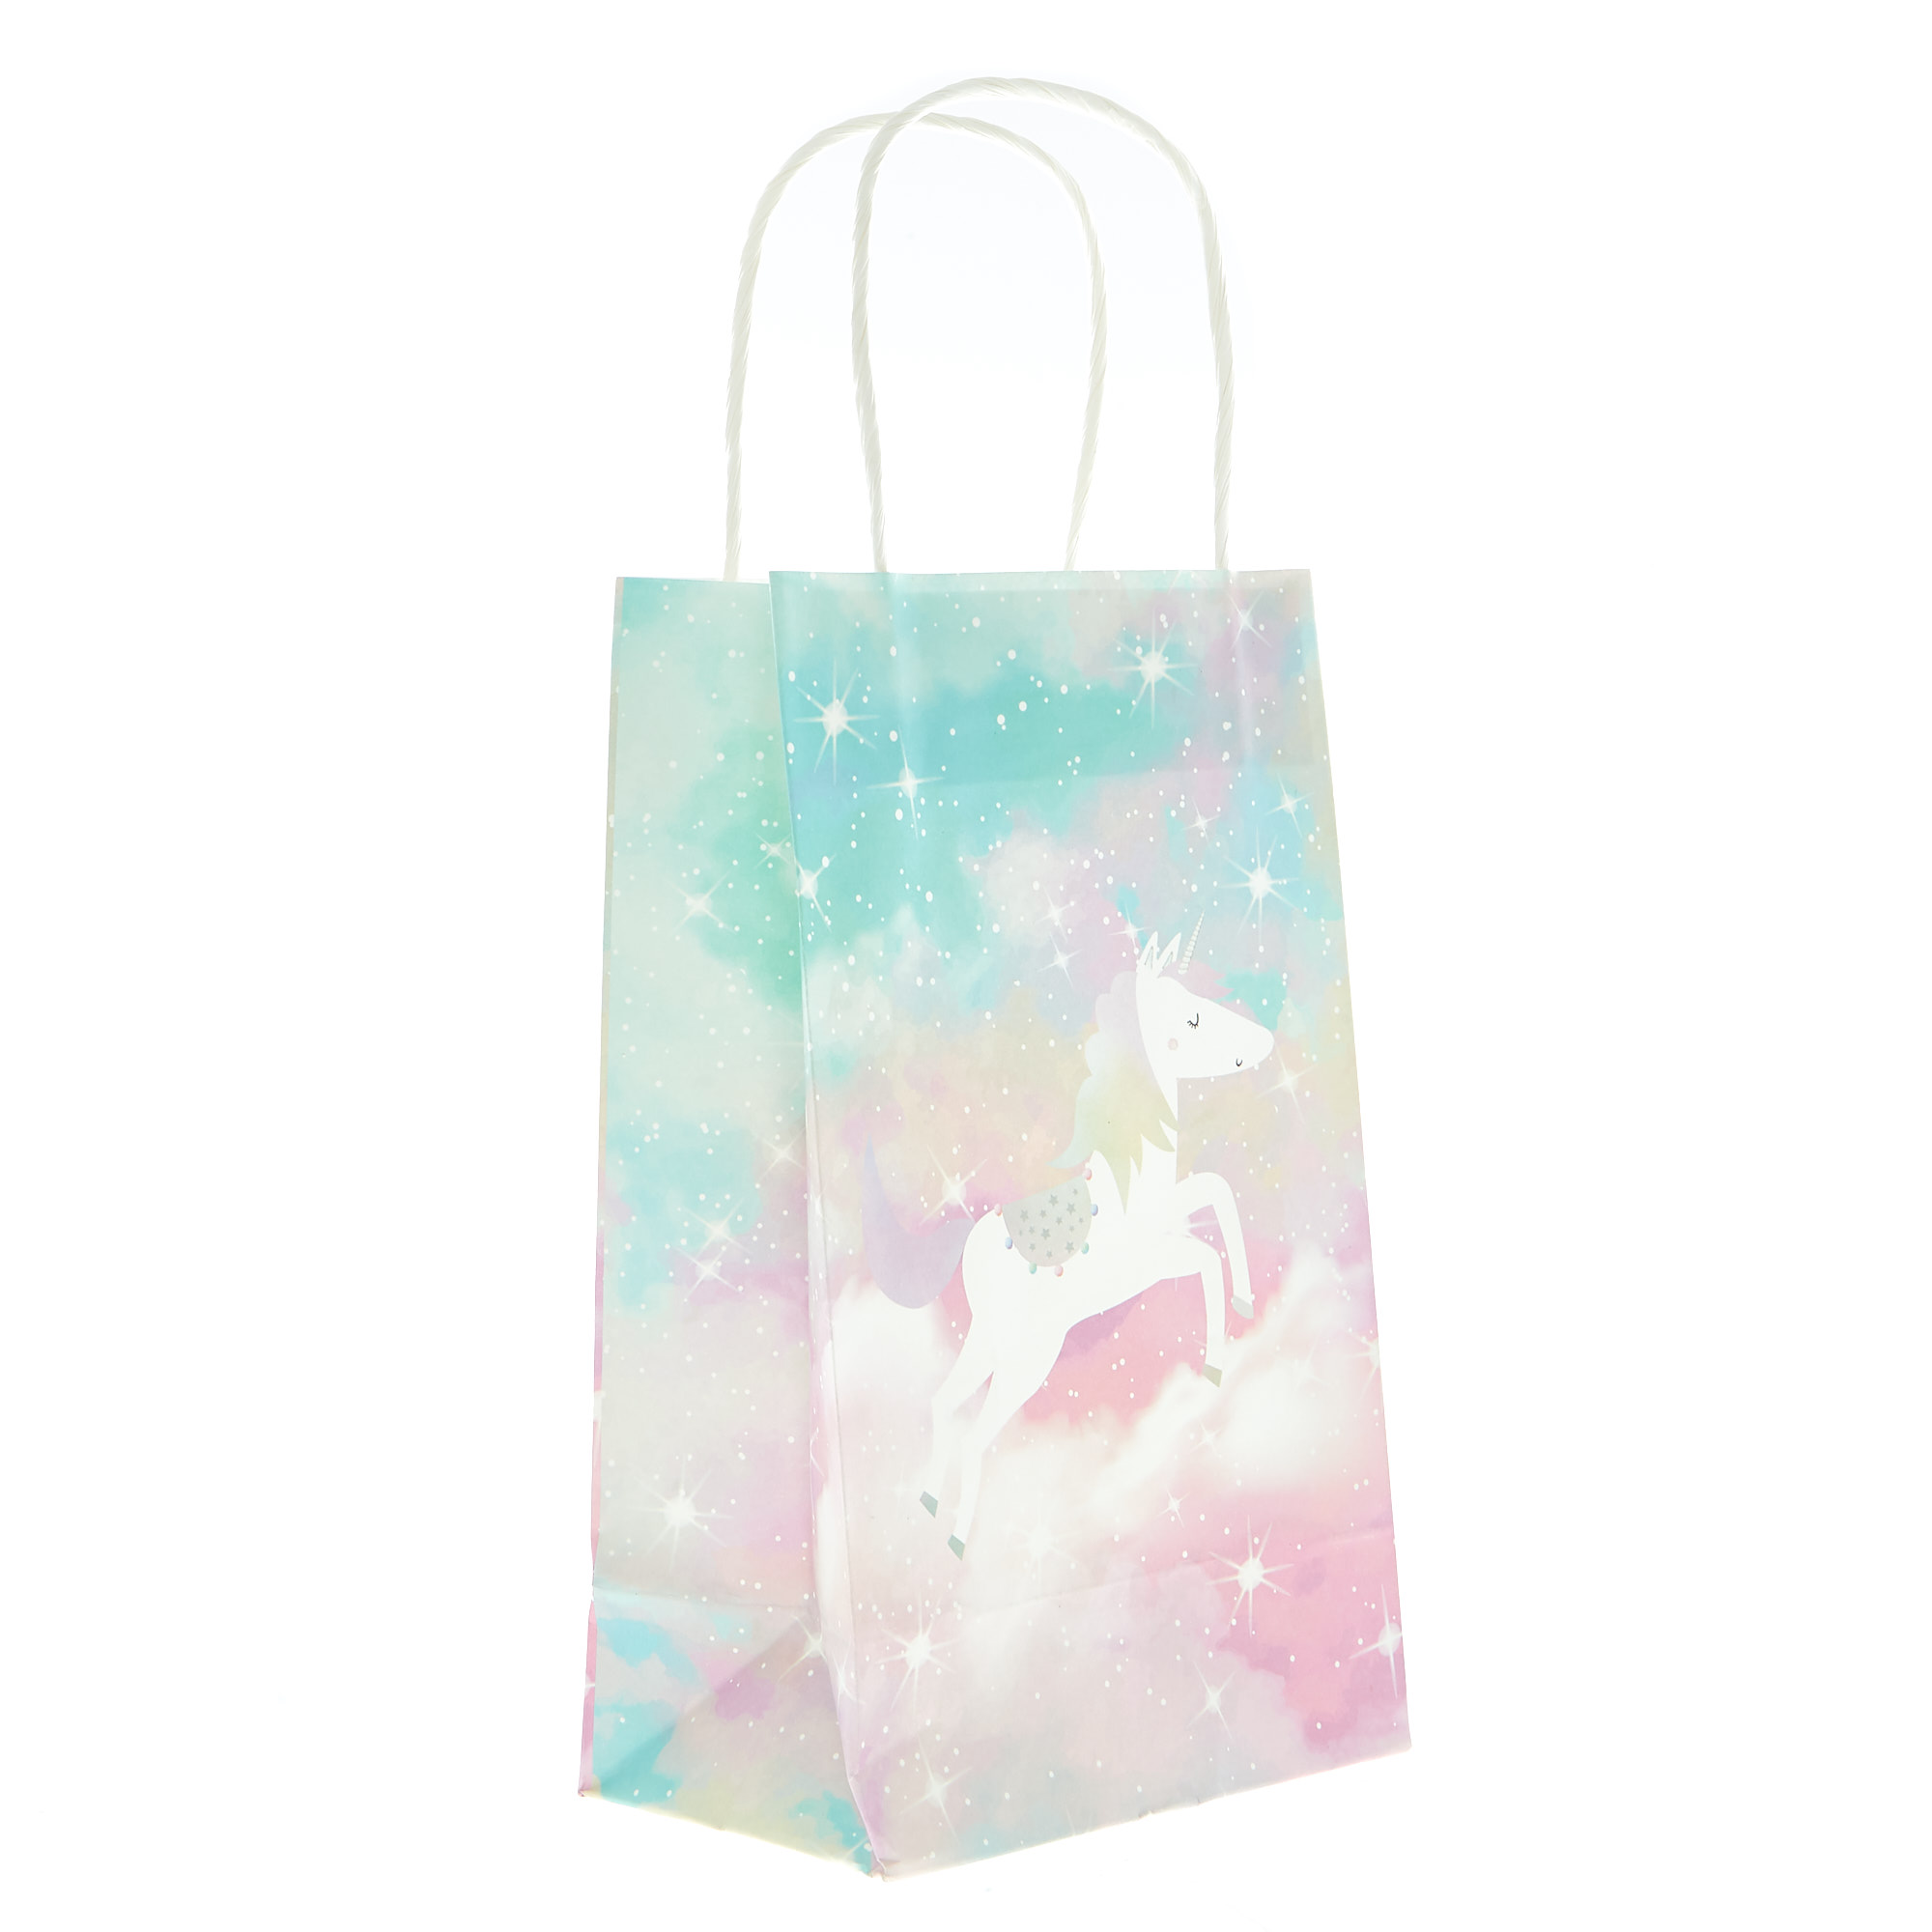 Buy Unicorn Paper Party Bags - Pack of 6 for GBP 1.49 | Card Factory UK